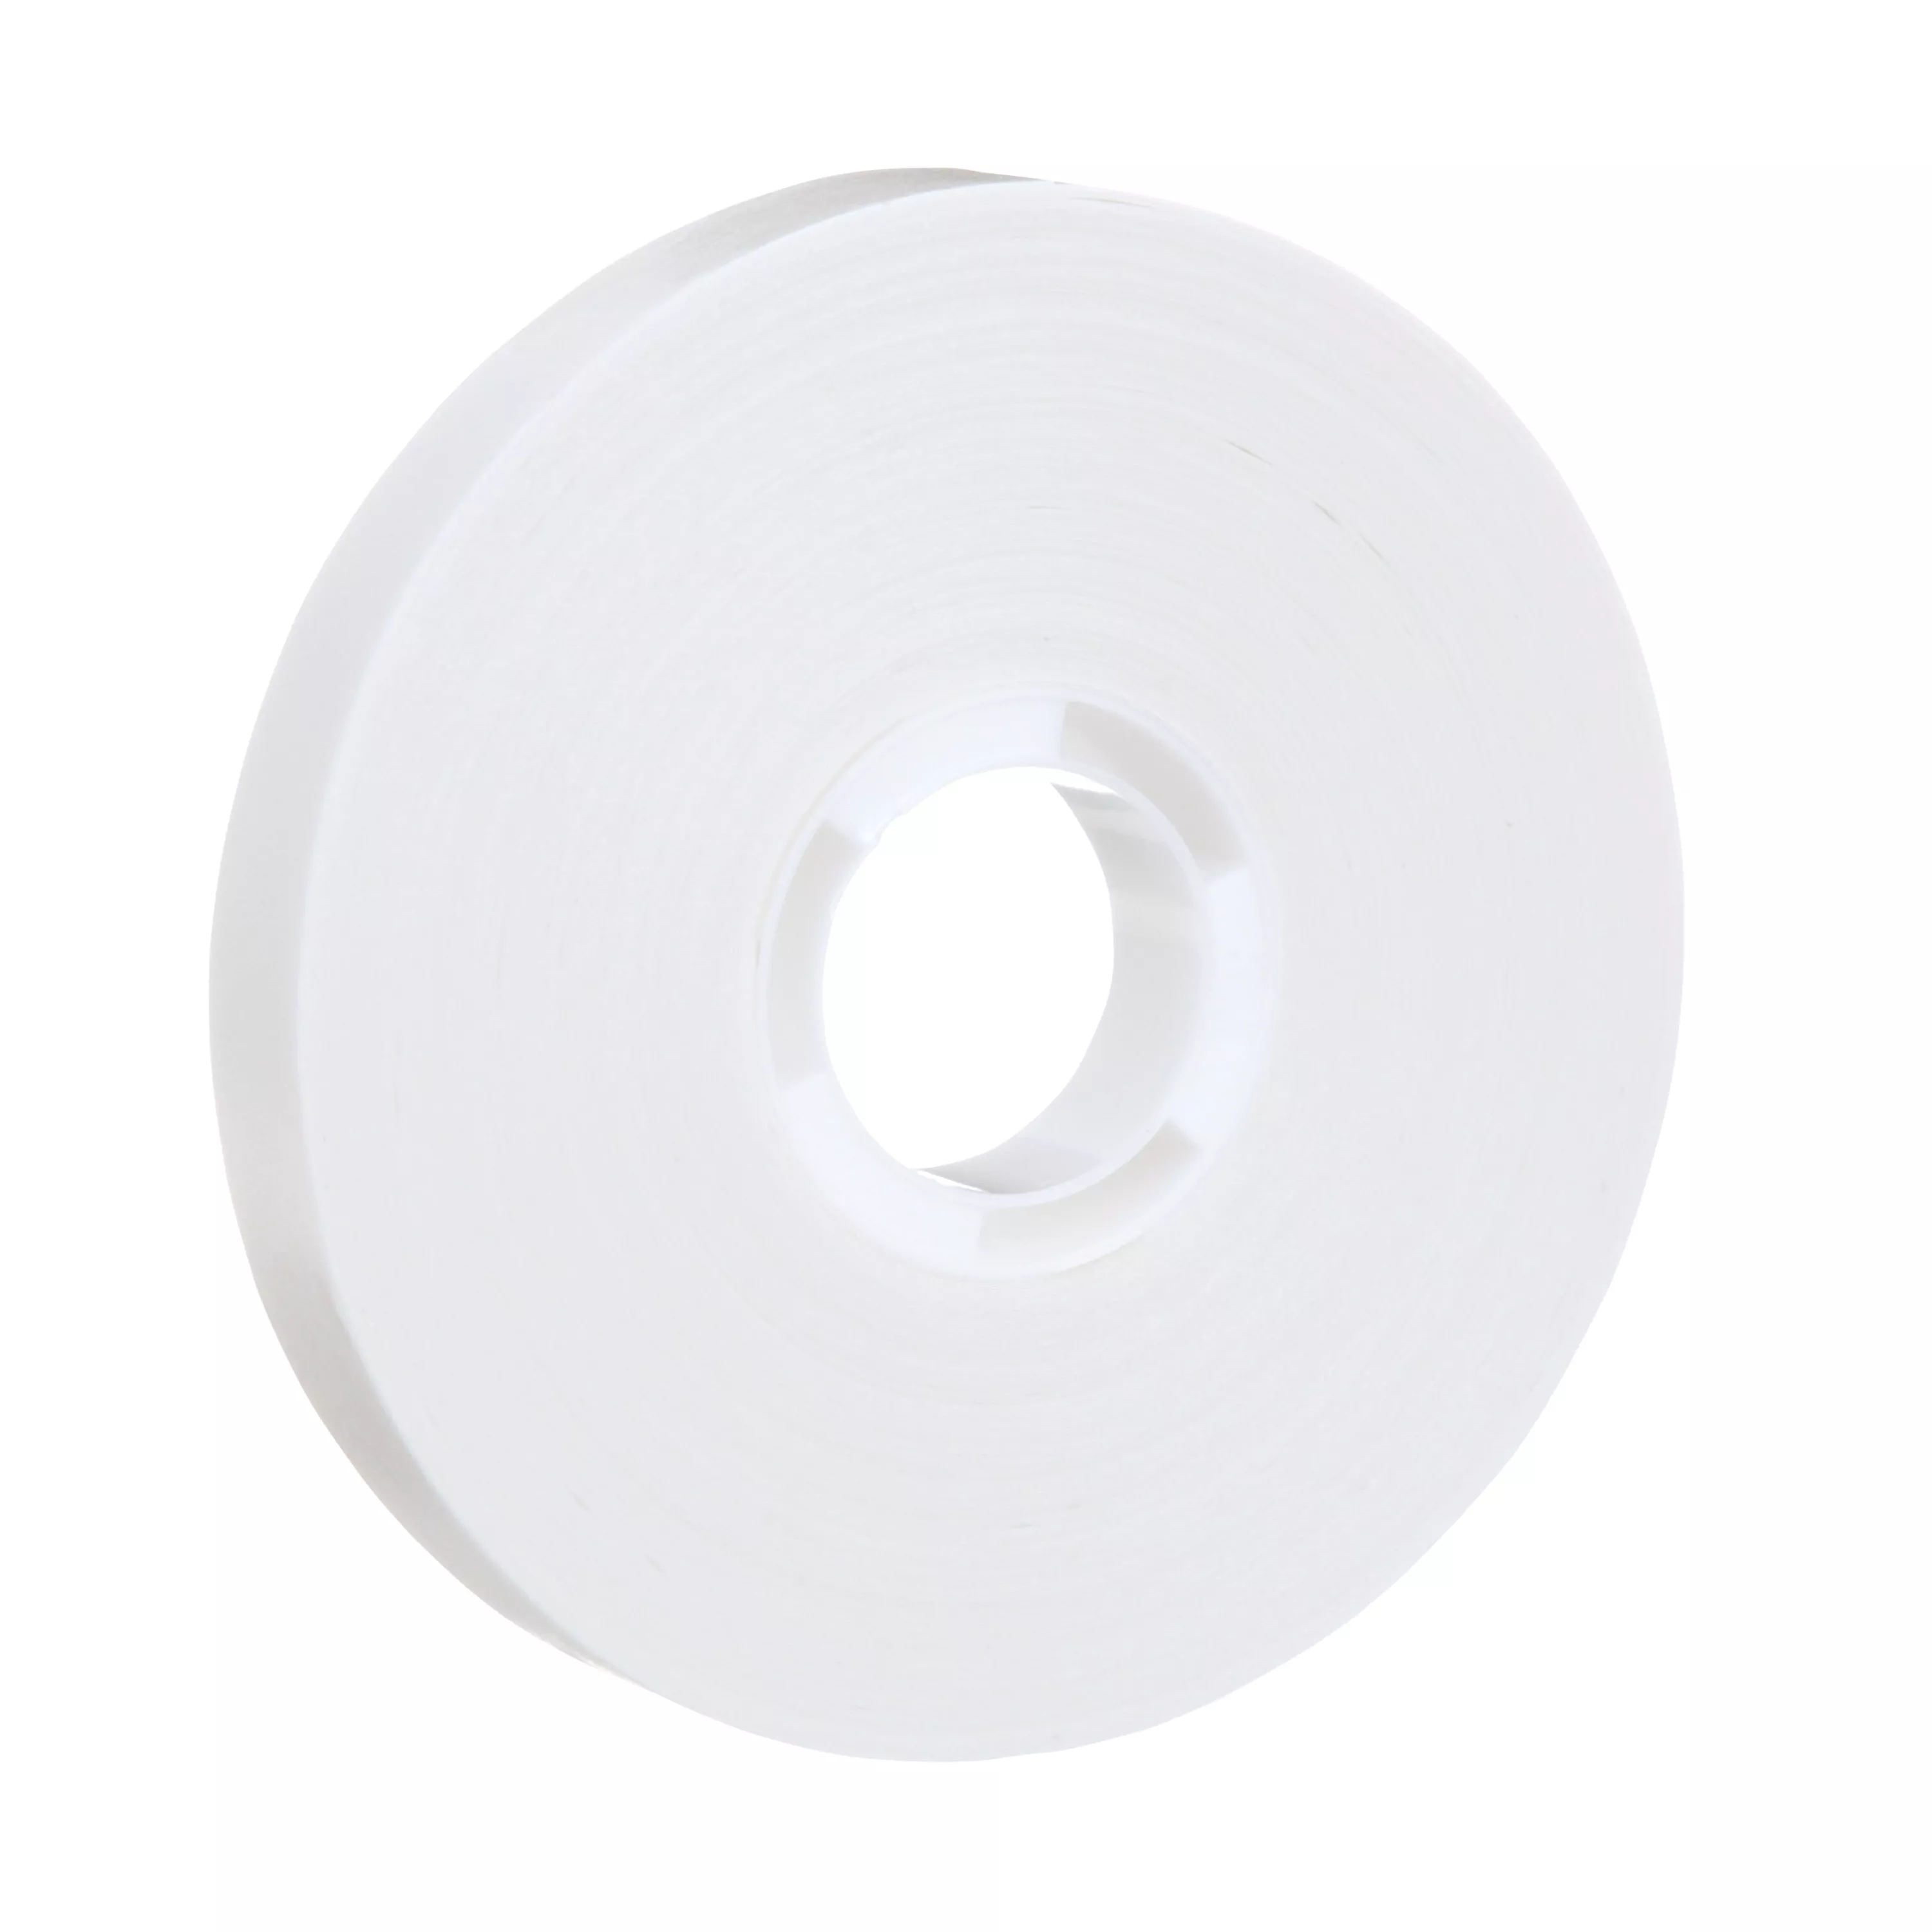 Scotch® ATG Repositionable Double Coated Tissue Tape 928, Translucent
White, 1/2 in x 36 yd, 2 mil, (12 Roll/Carton) 72 Roll/Case